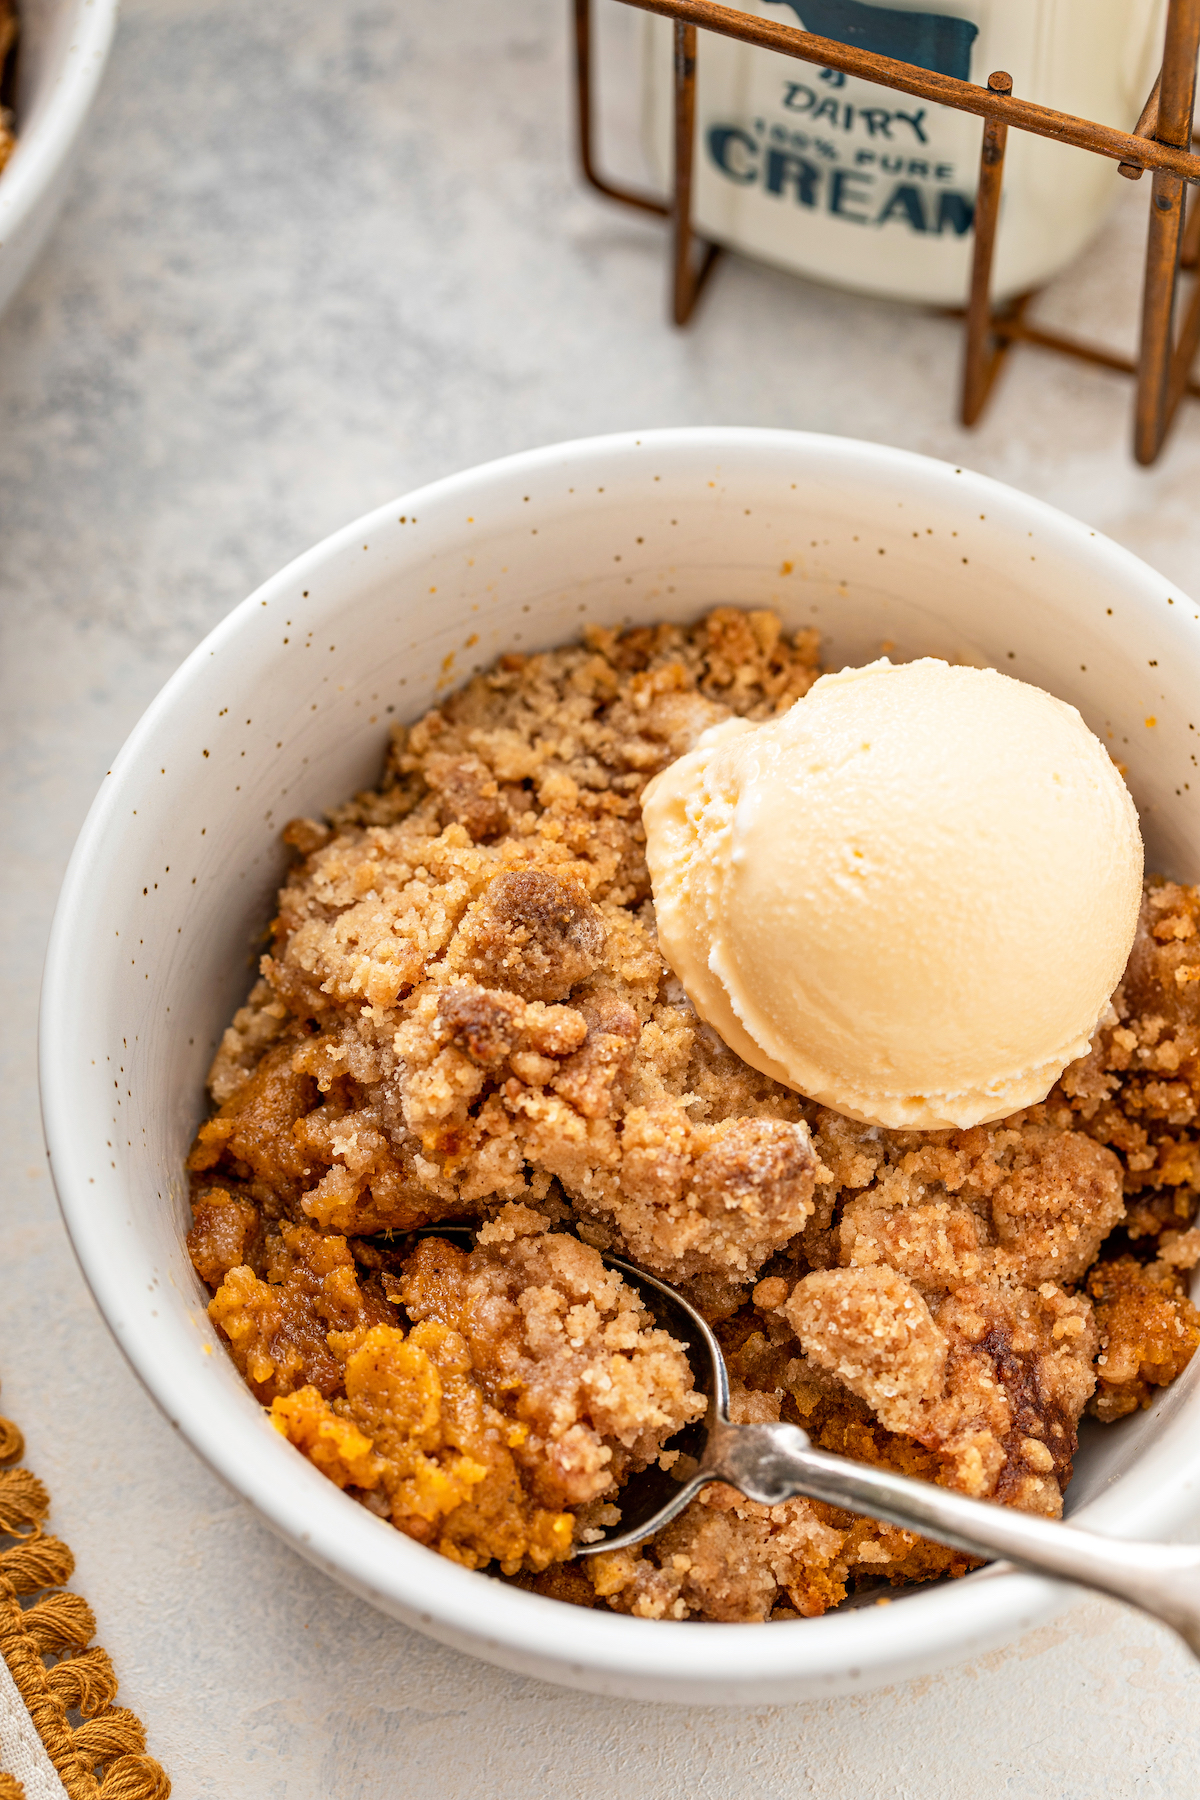 A spoon taking a bite out of a bowl of sweet potato crumble.